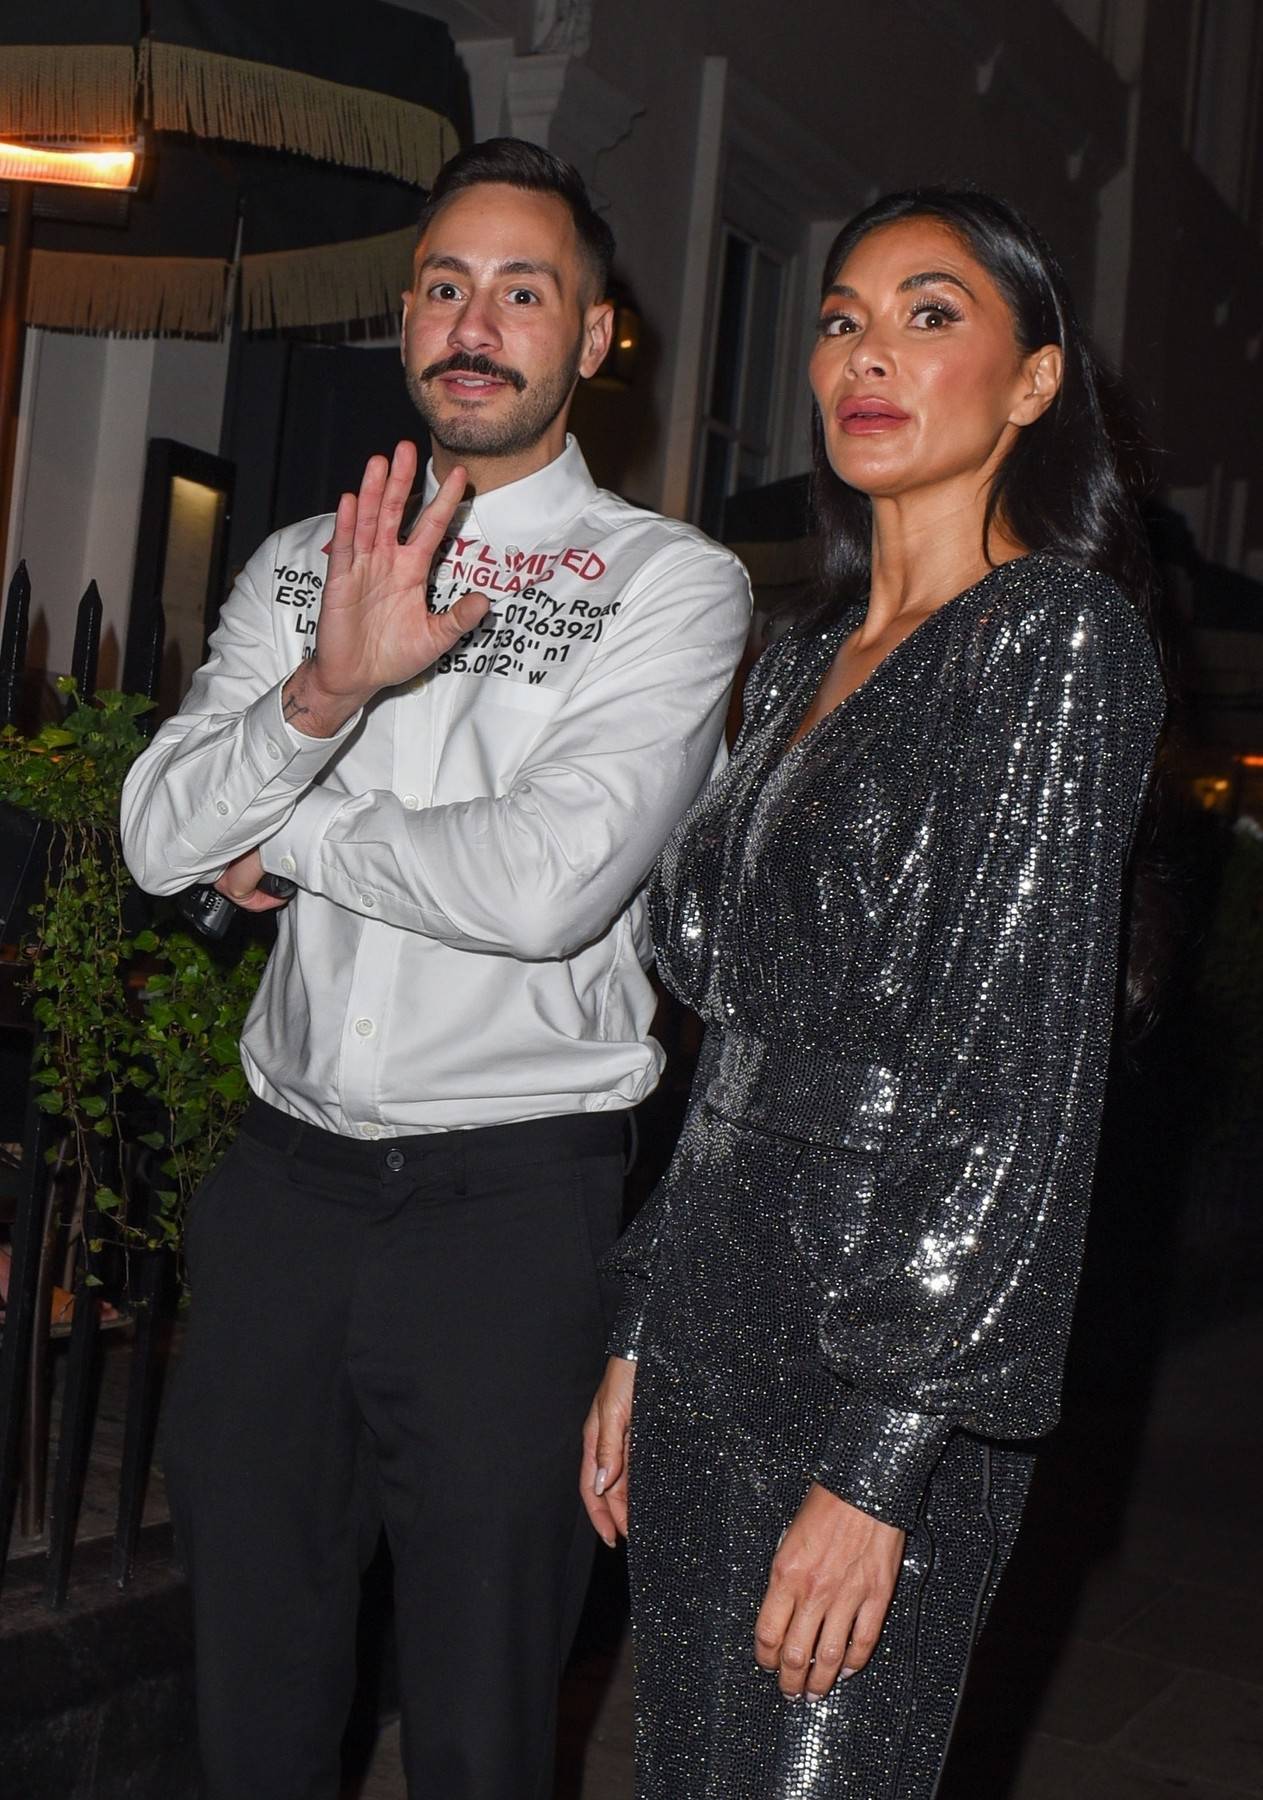 *EXCLUSIVE* The American Singer Nicole Scherzinger looked glamorous in her glizy silver dress during an evening out enjoying a spot of dinner in London's Soho.